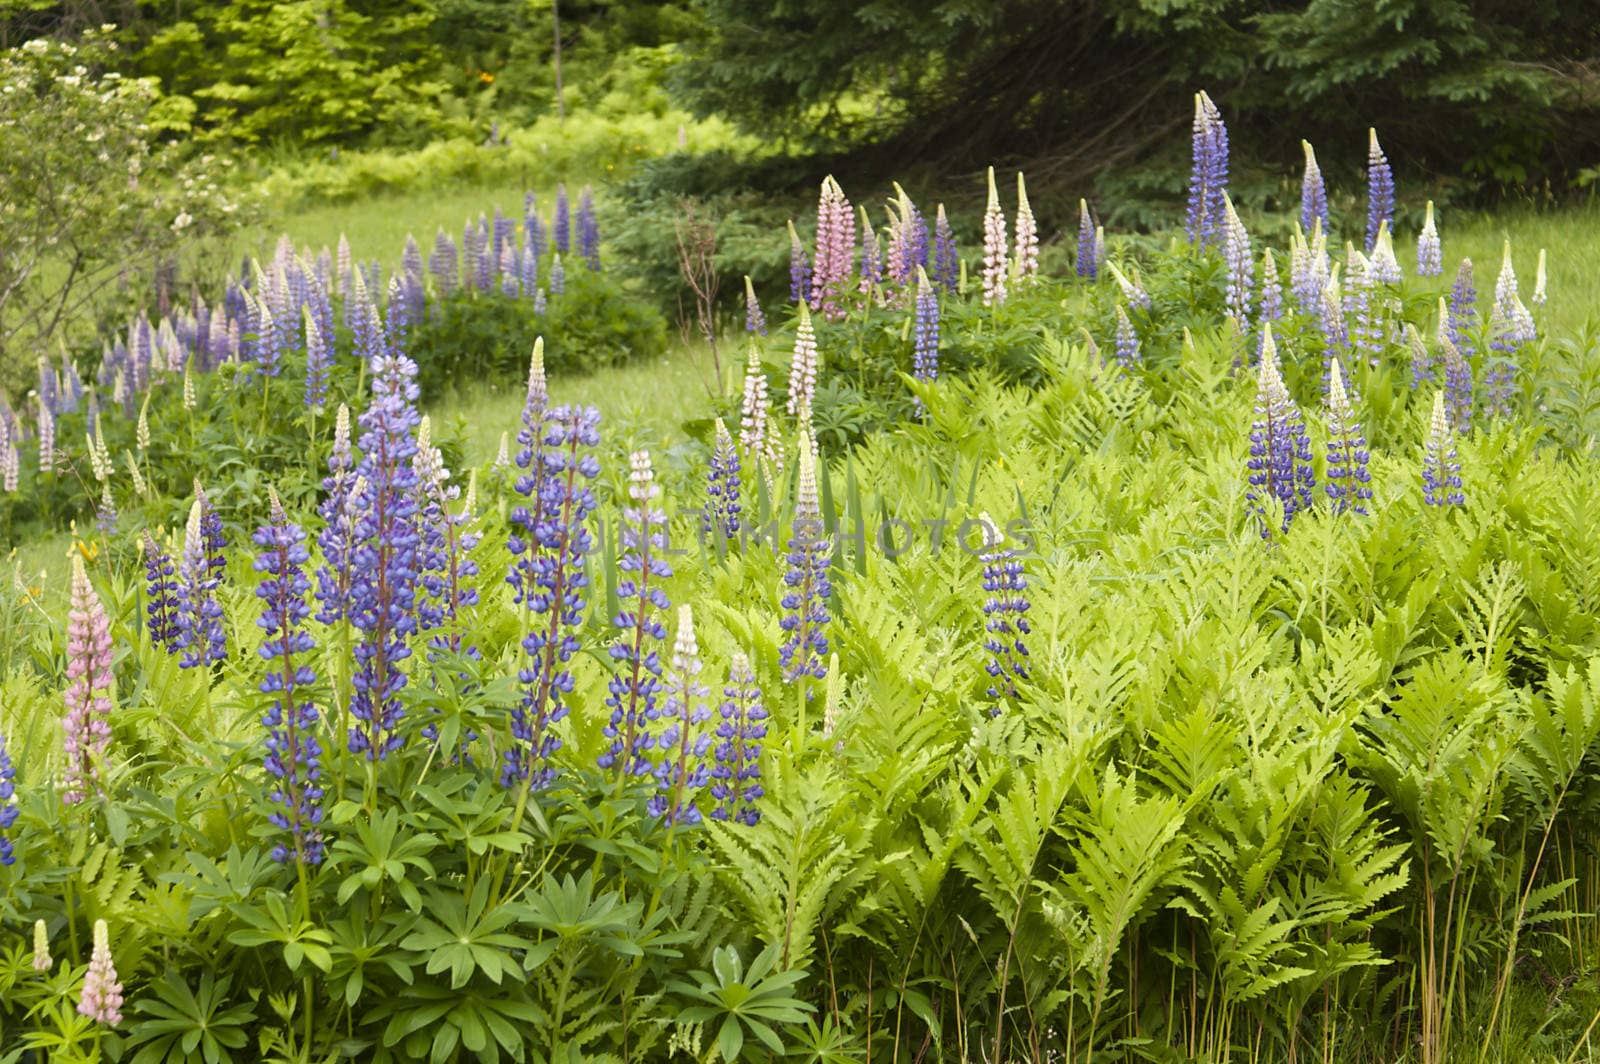 A rural field with lupine flowers and ferns.